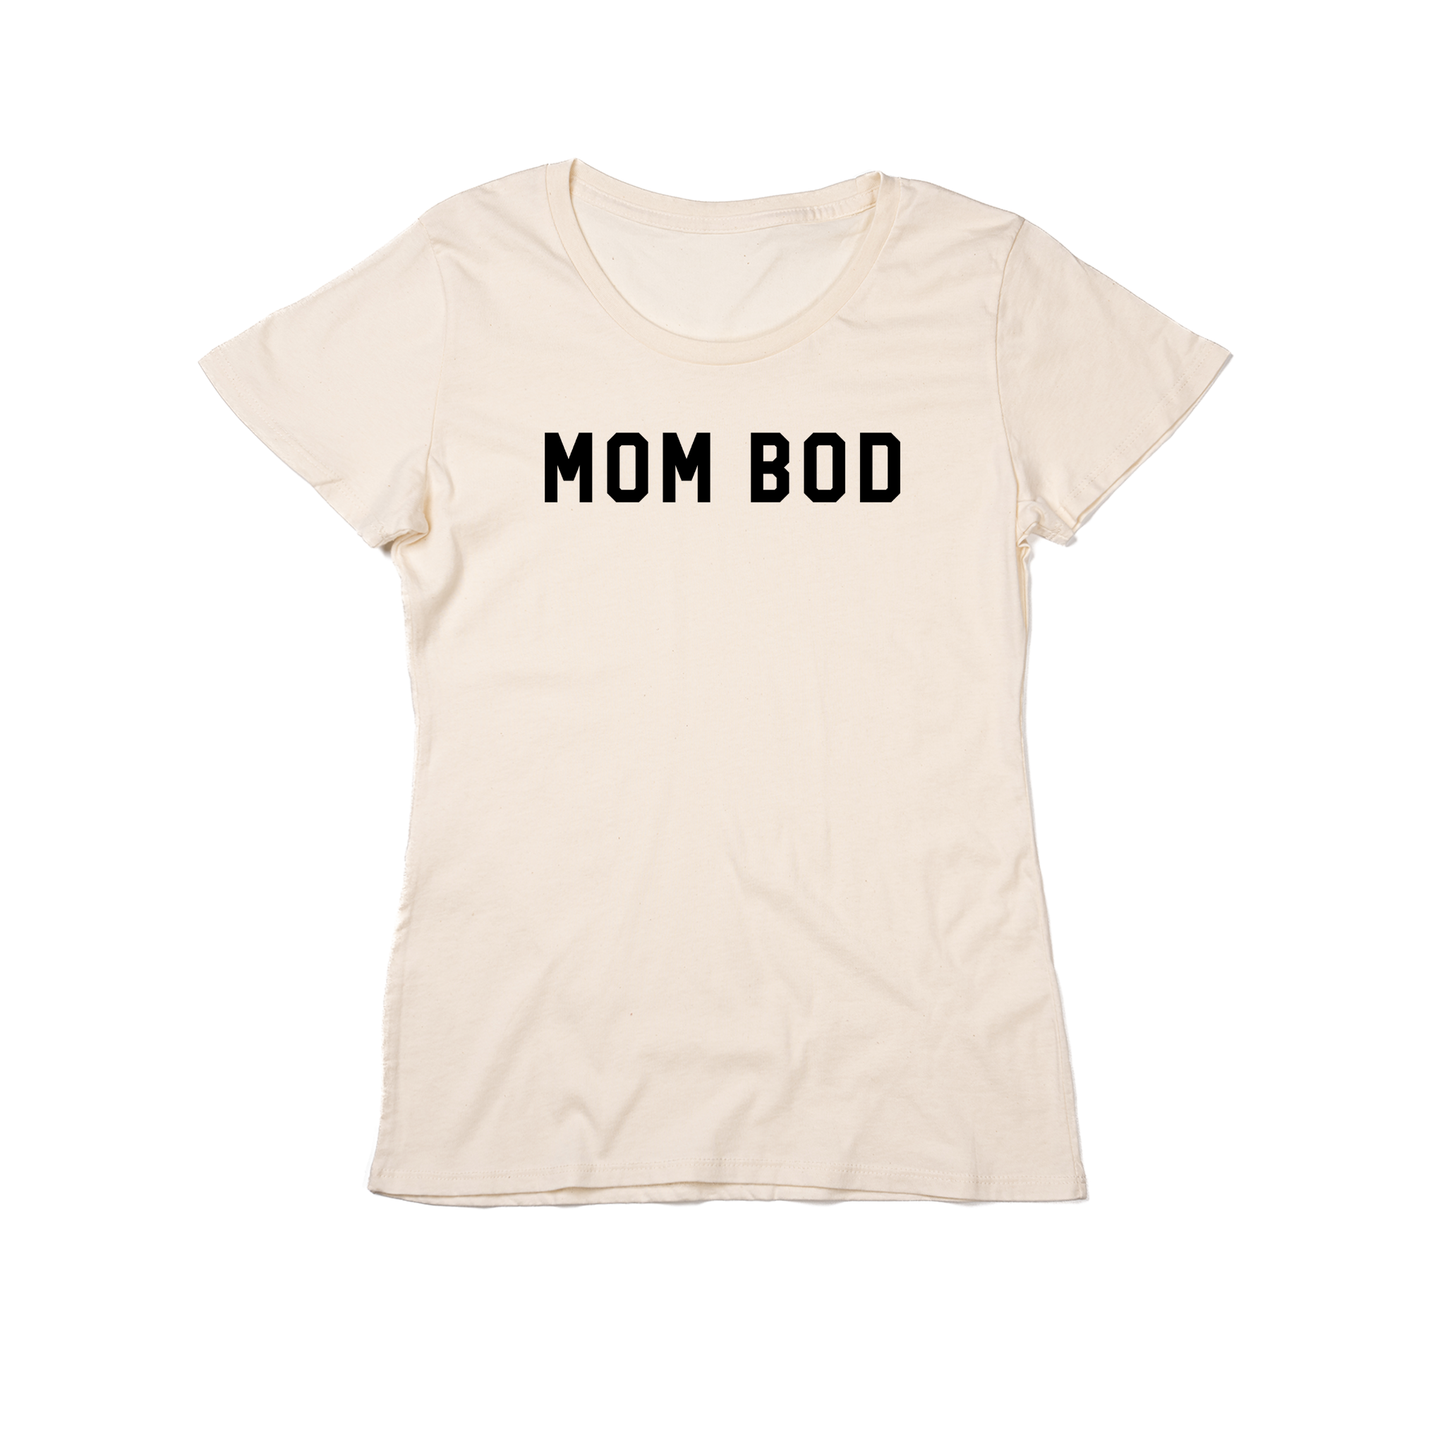 Mom Bod (Across Front, Black) - Women's Fitted Tee (Natural)